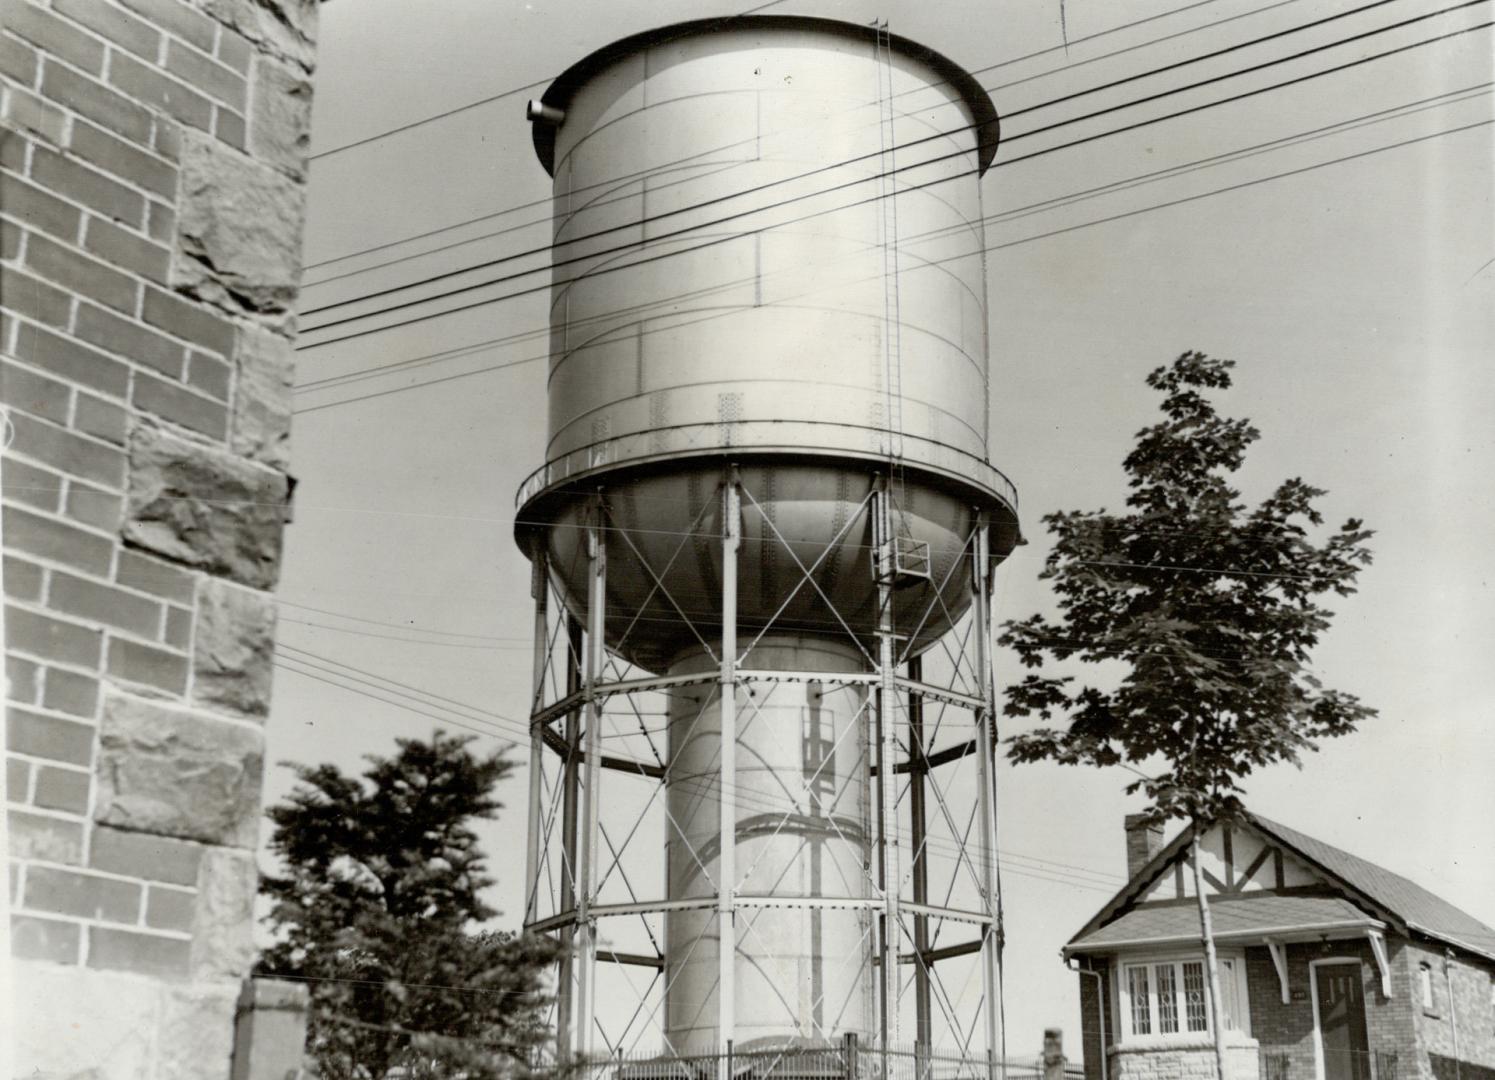 Roselawn Ave. tower. Sealed and is virtually impregnable to attack. Answering a second call early this afternoon that a man was climbing the tower, po(...)